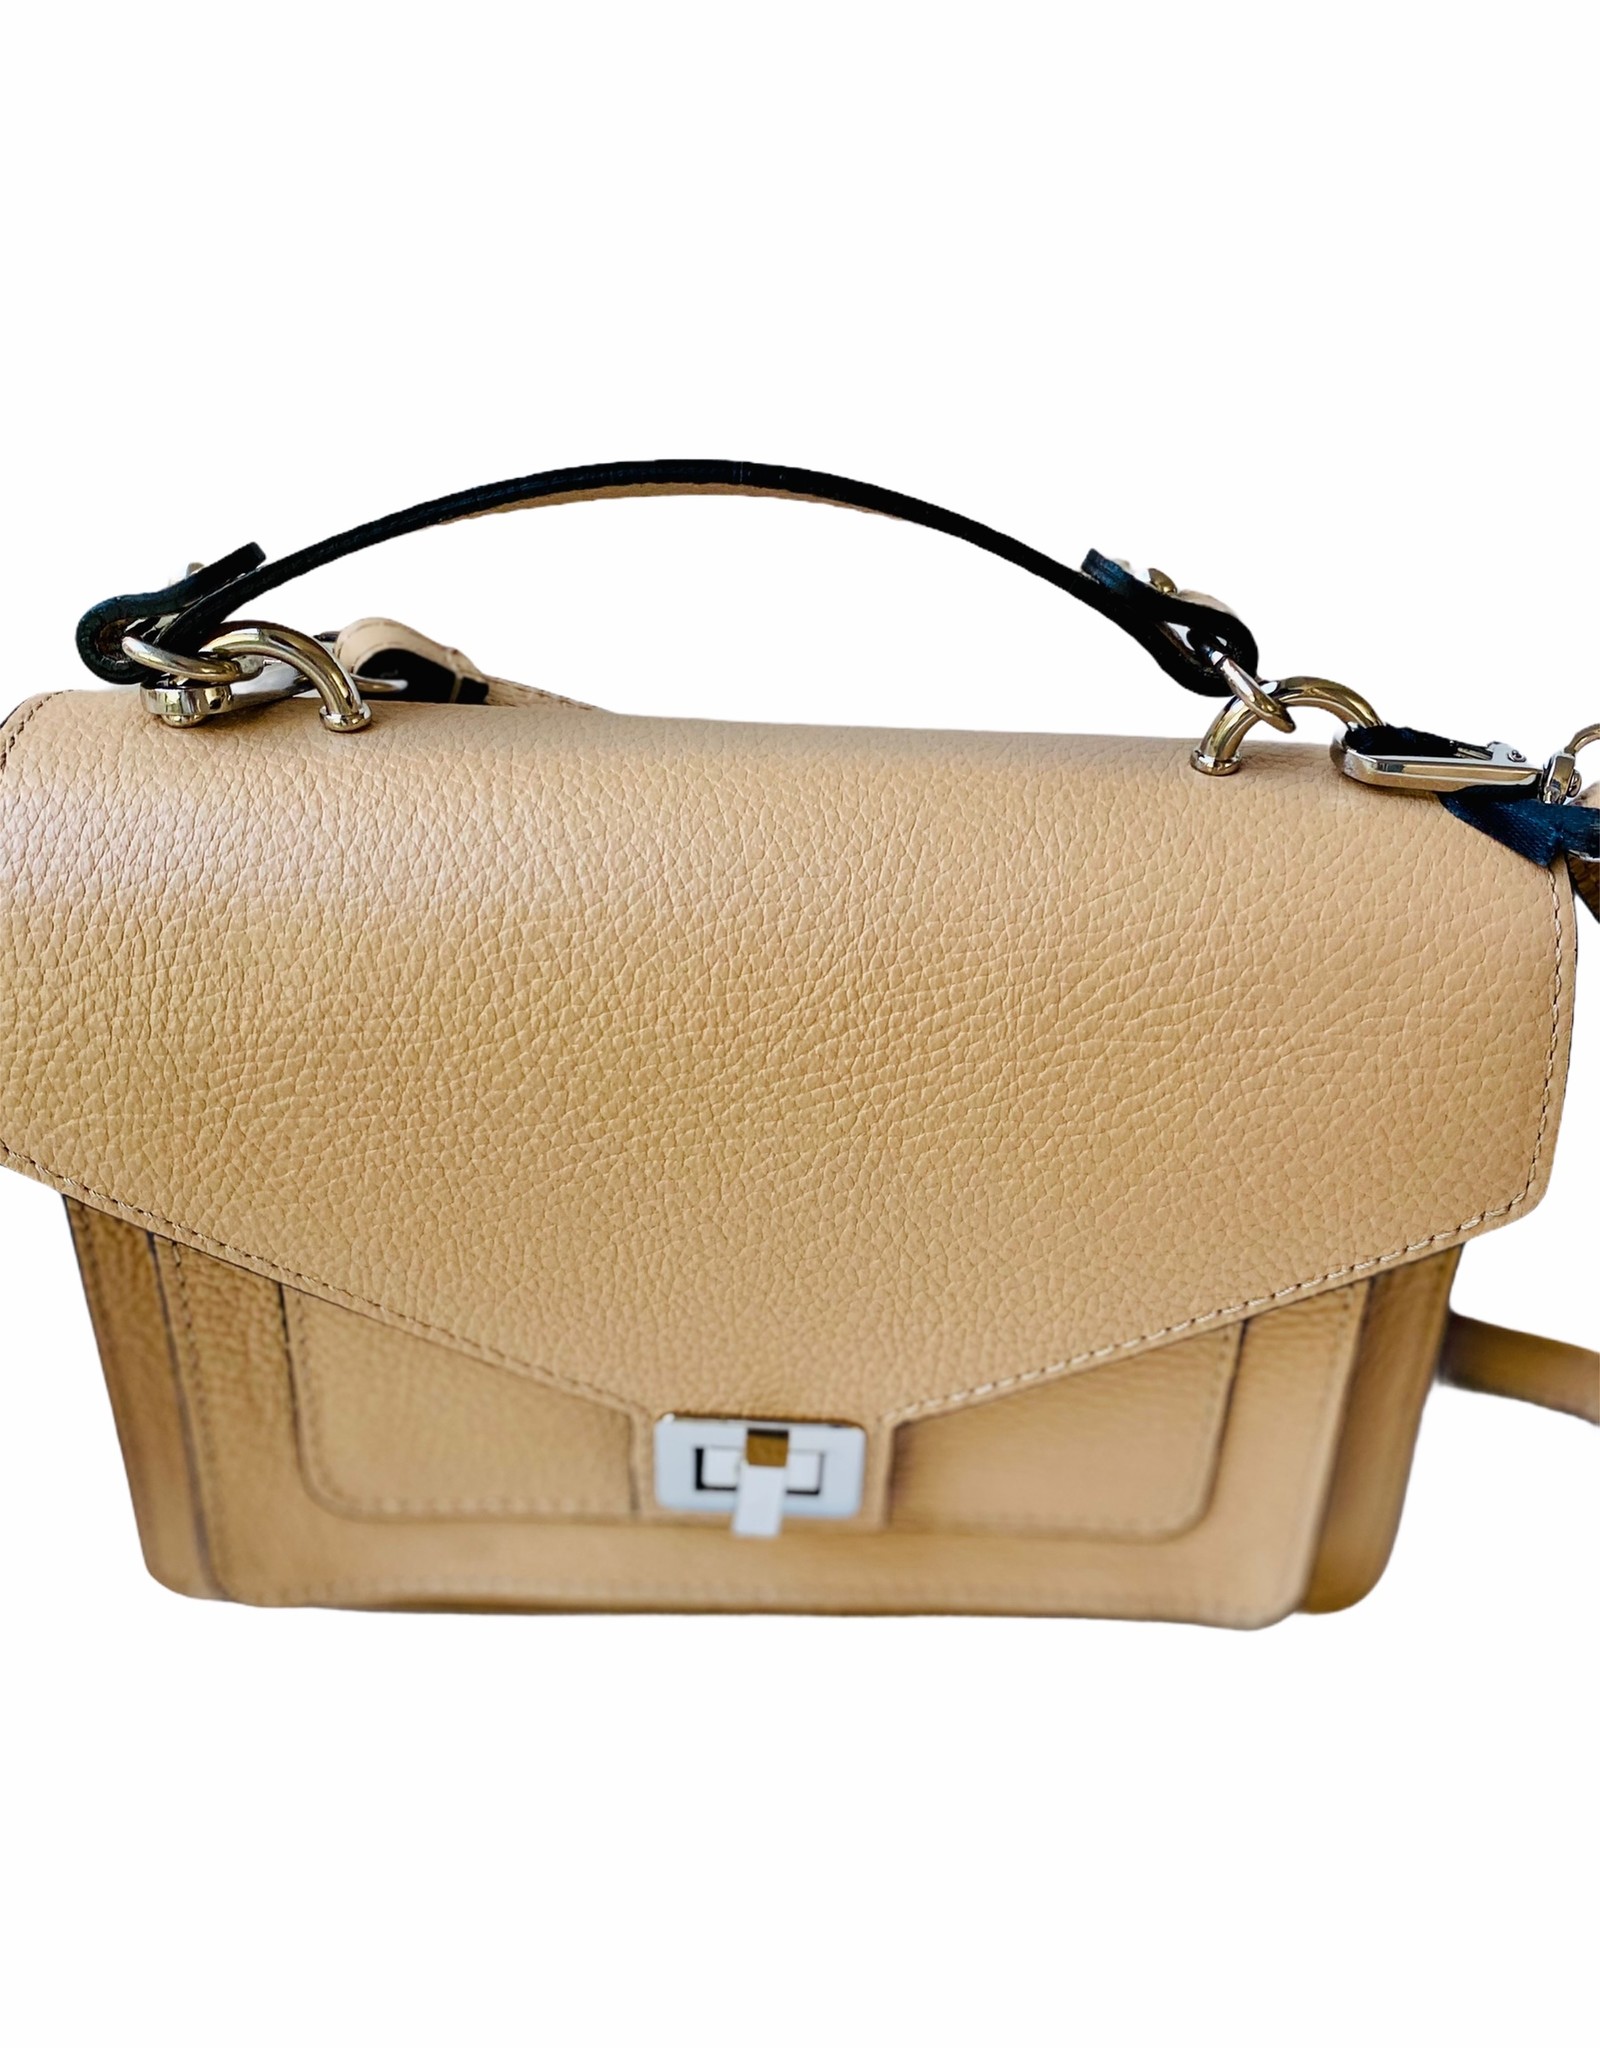 Leather classic bag with handle and long shoulderbelt.